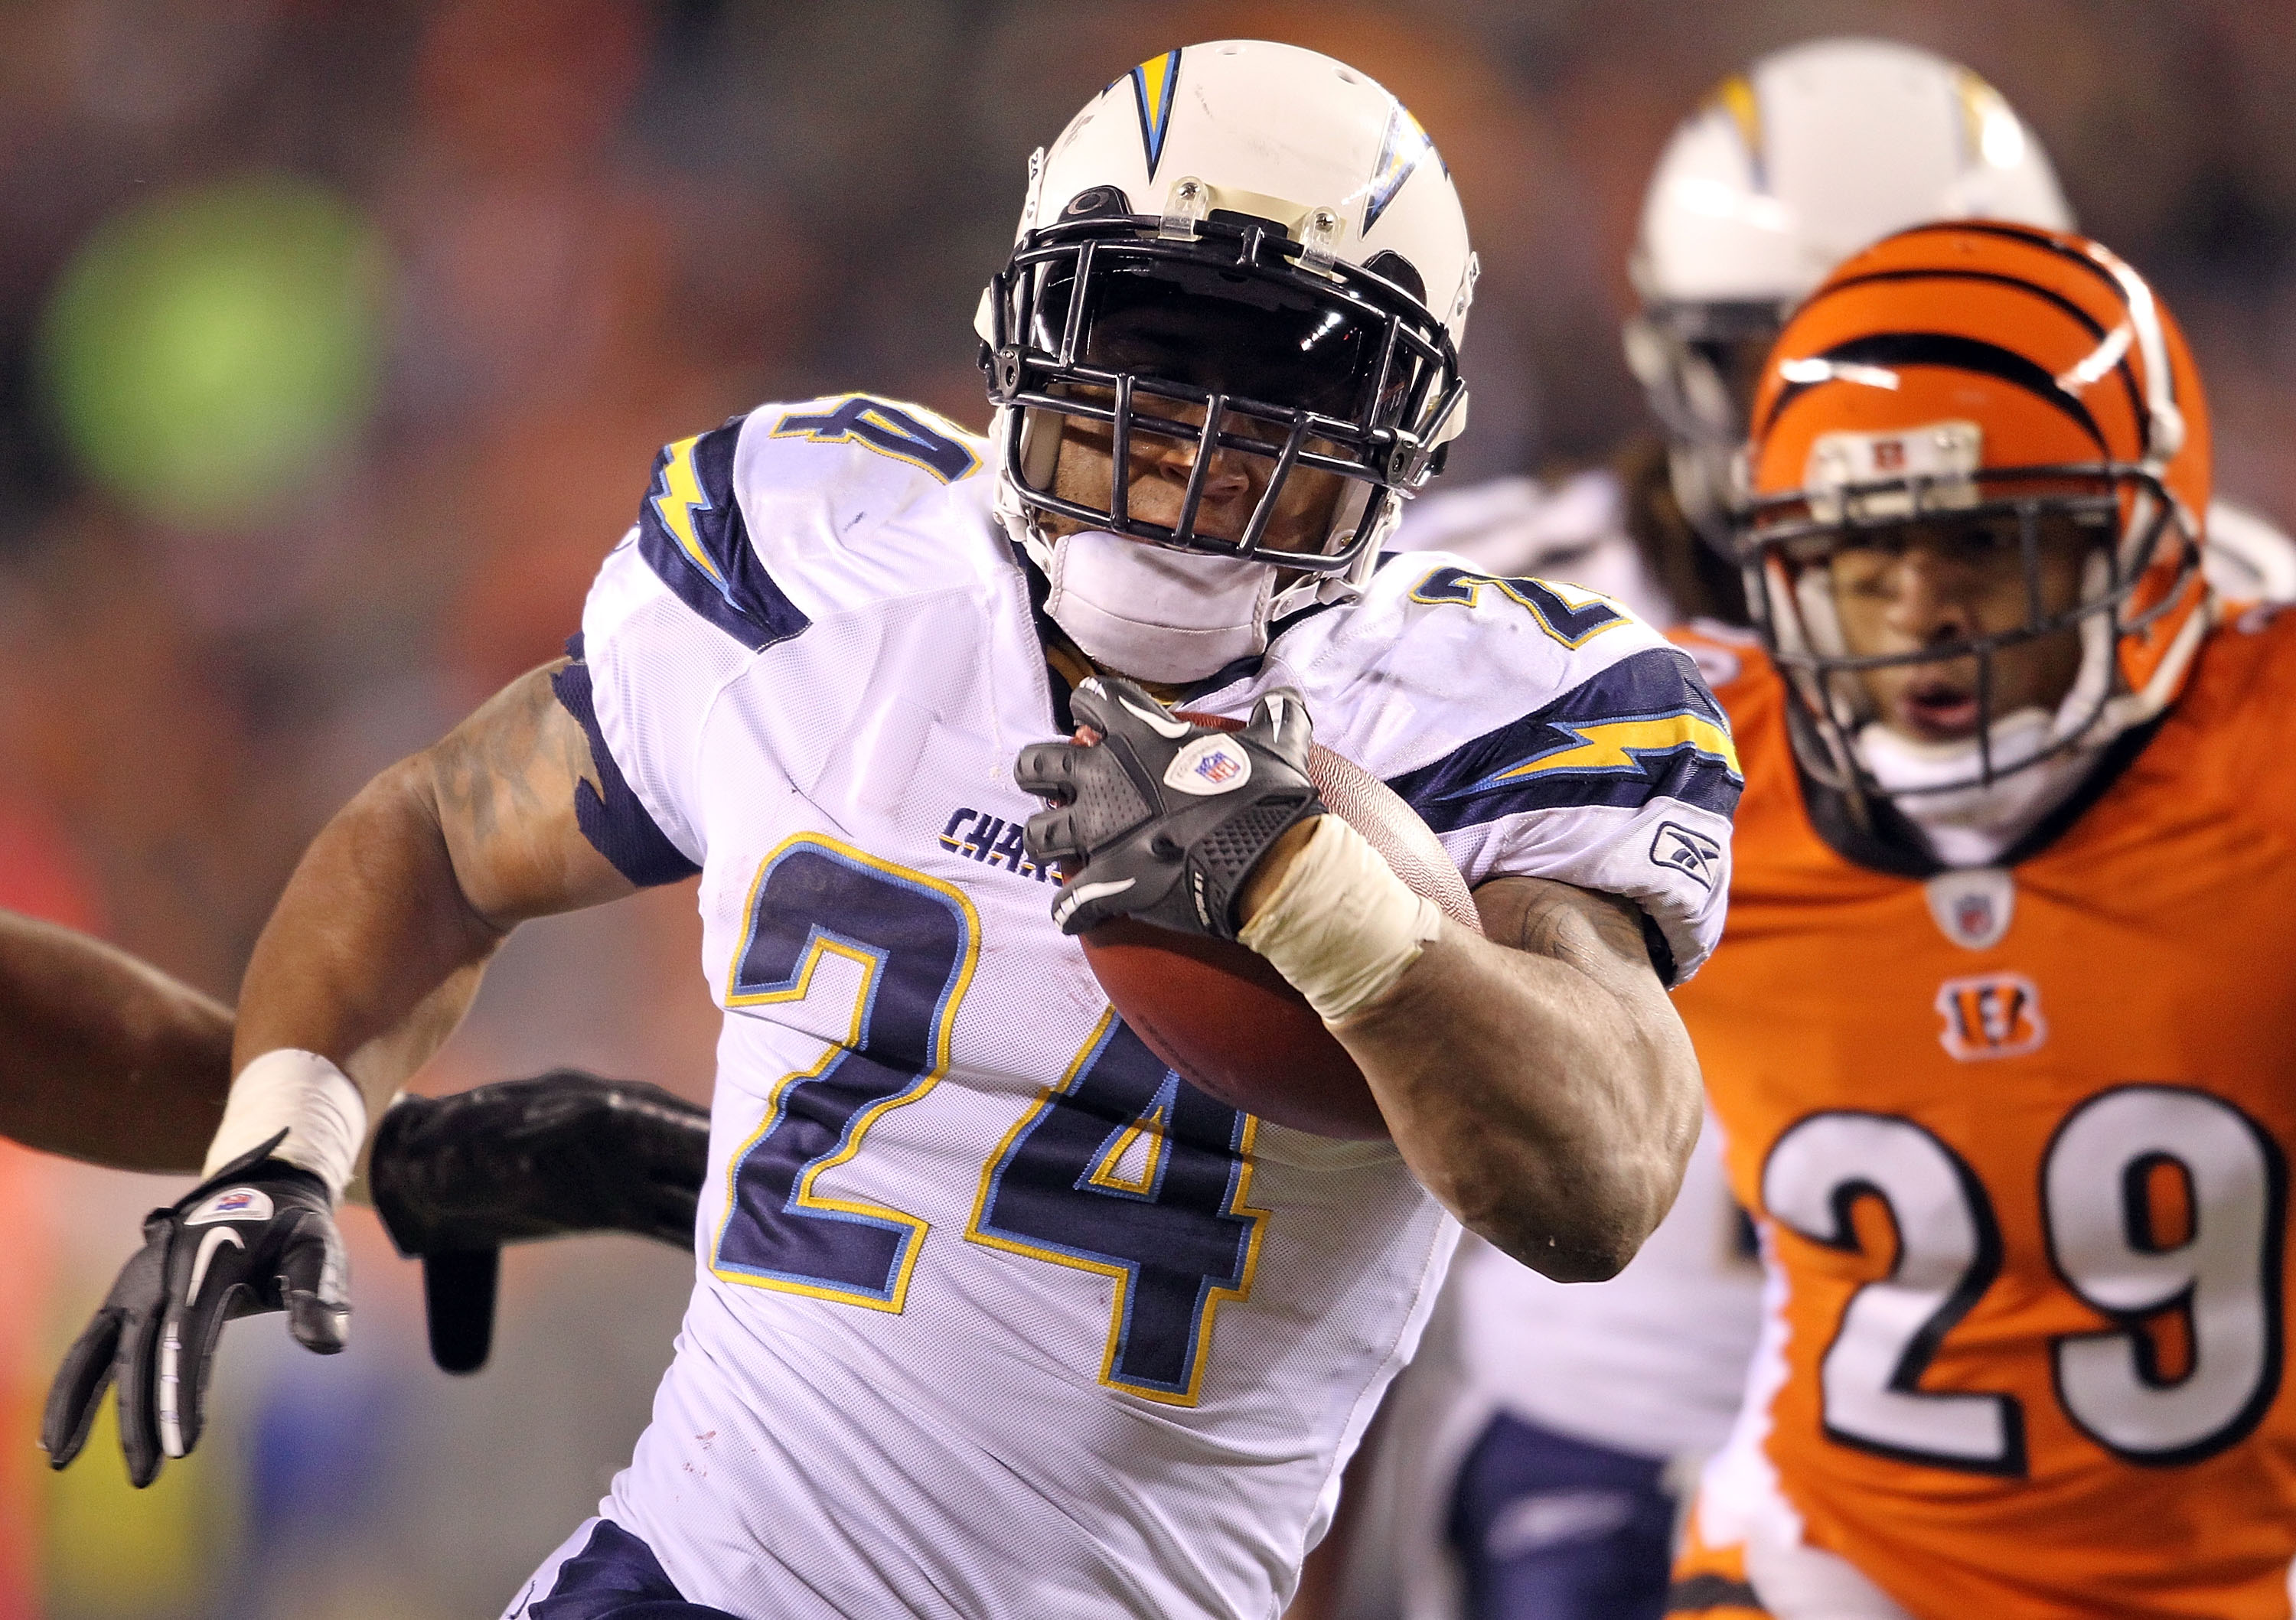 San Diego Chargers Or L.A. Chargers: The Pros and Cons of L.A. and